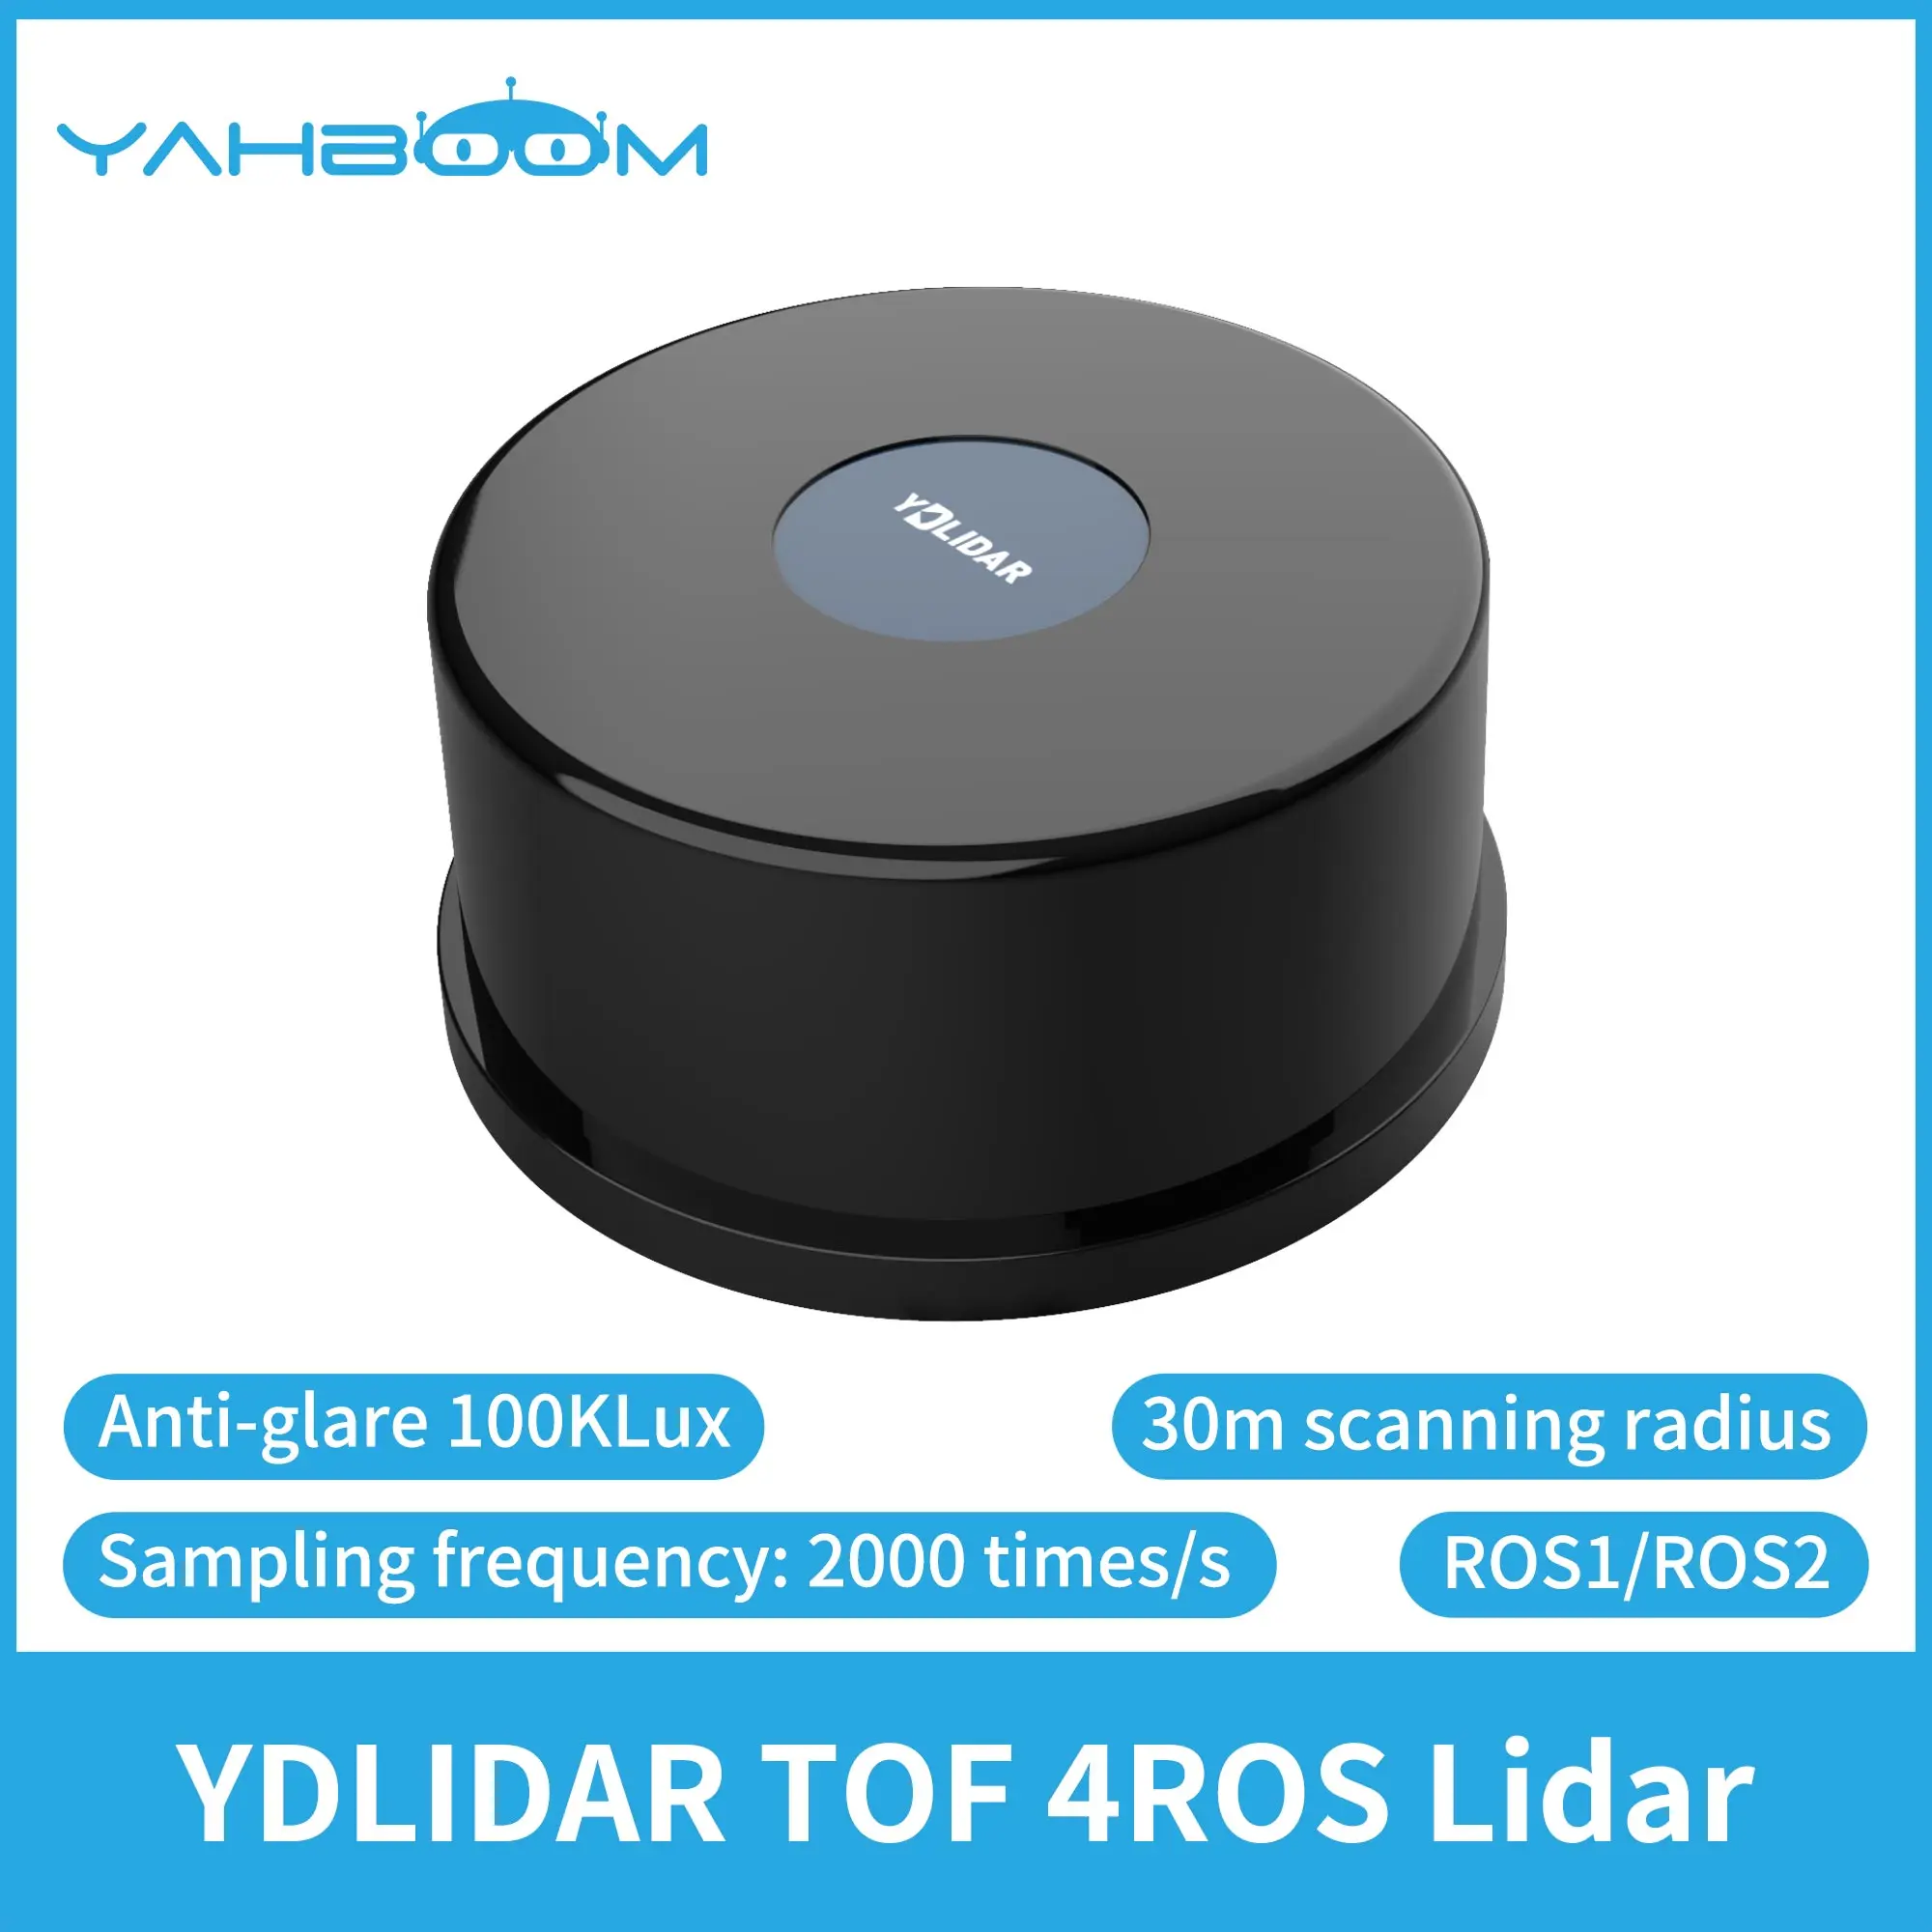 YDLIDAR Lidar 4ROS TOF 30M Range Waterproof Dustproof Anti-Glare 100KLux High-precision Mapping for ROS ROS2 Raspberry Pi Jetson